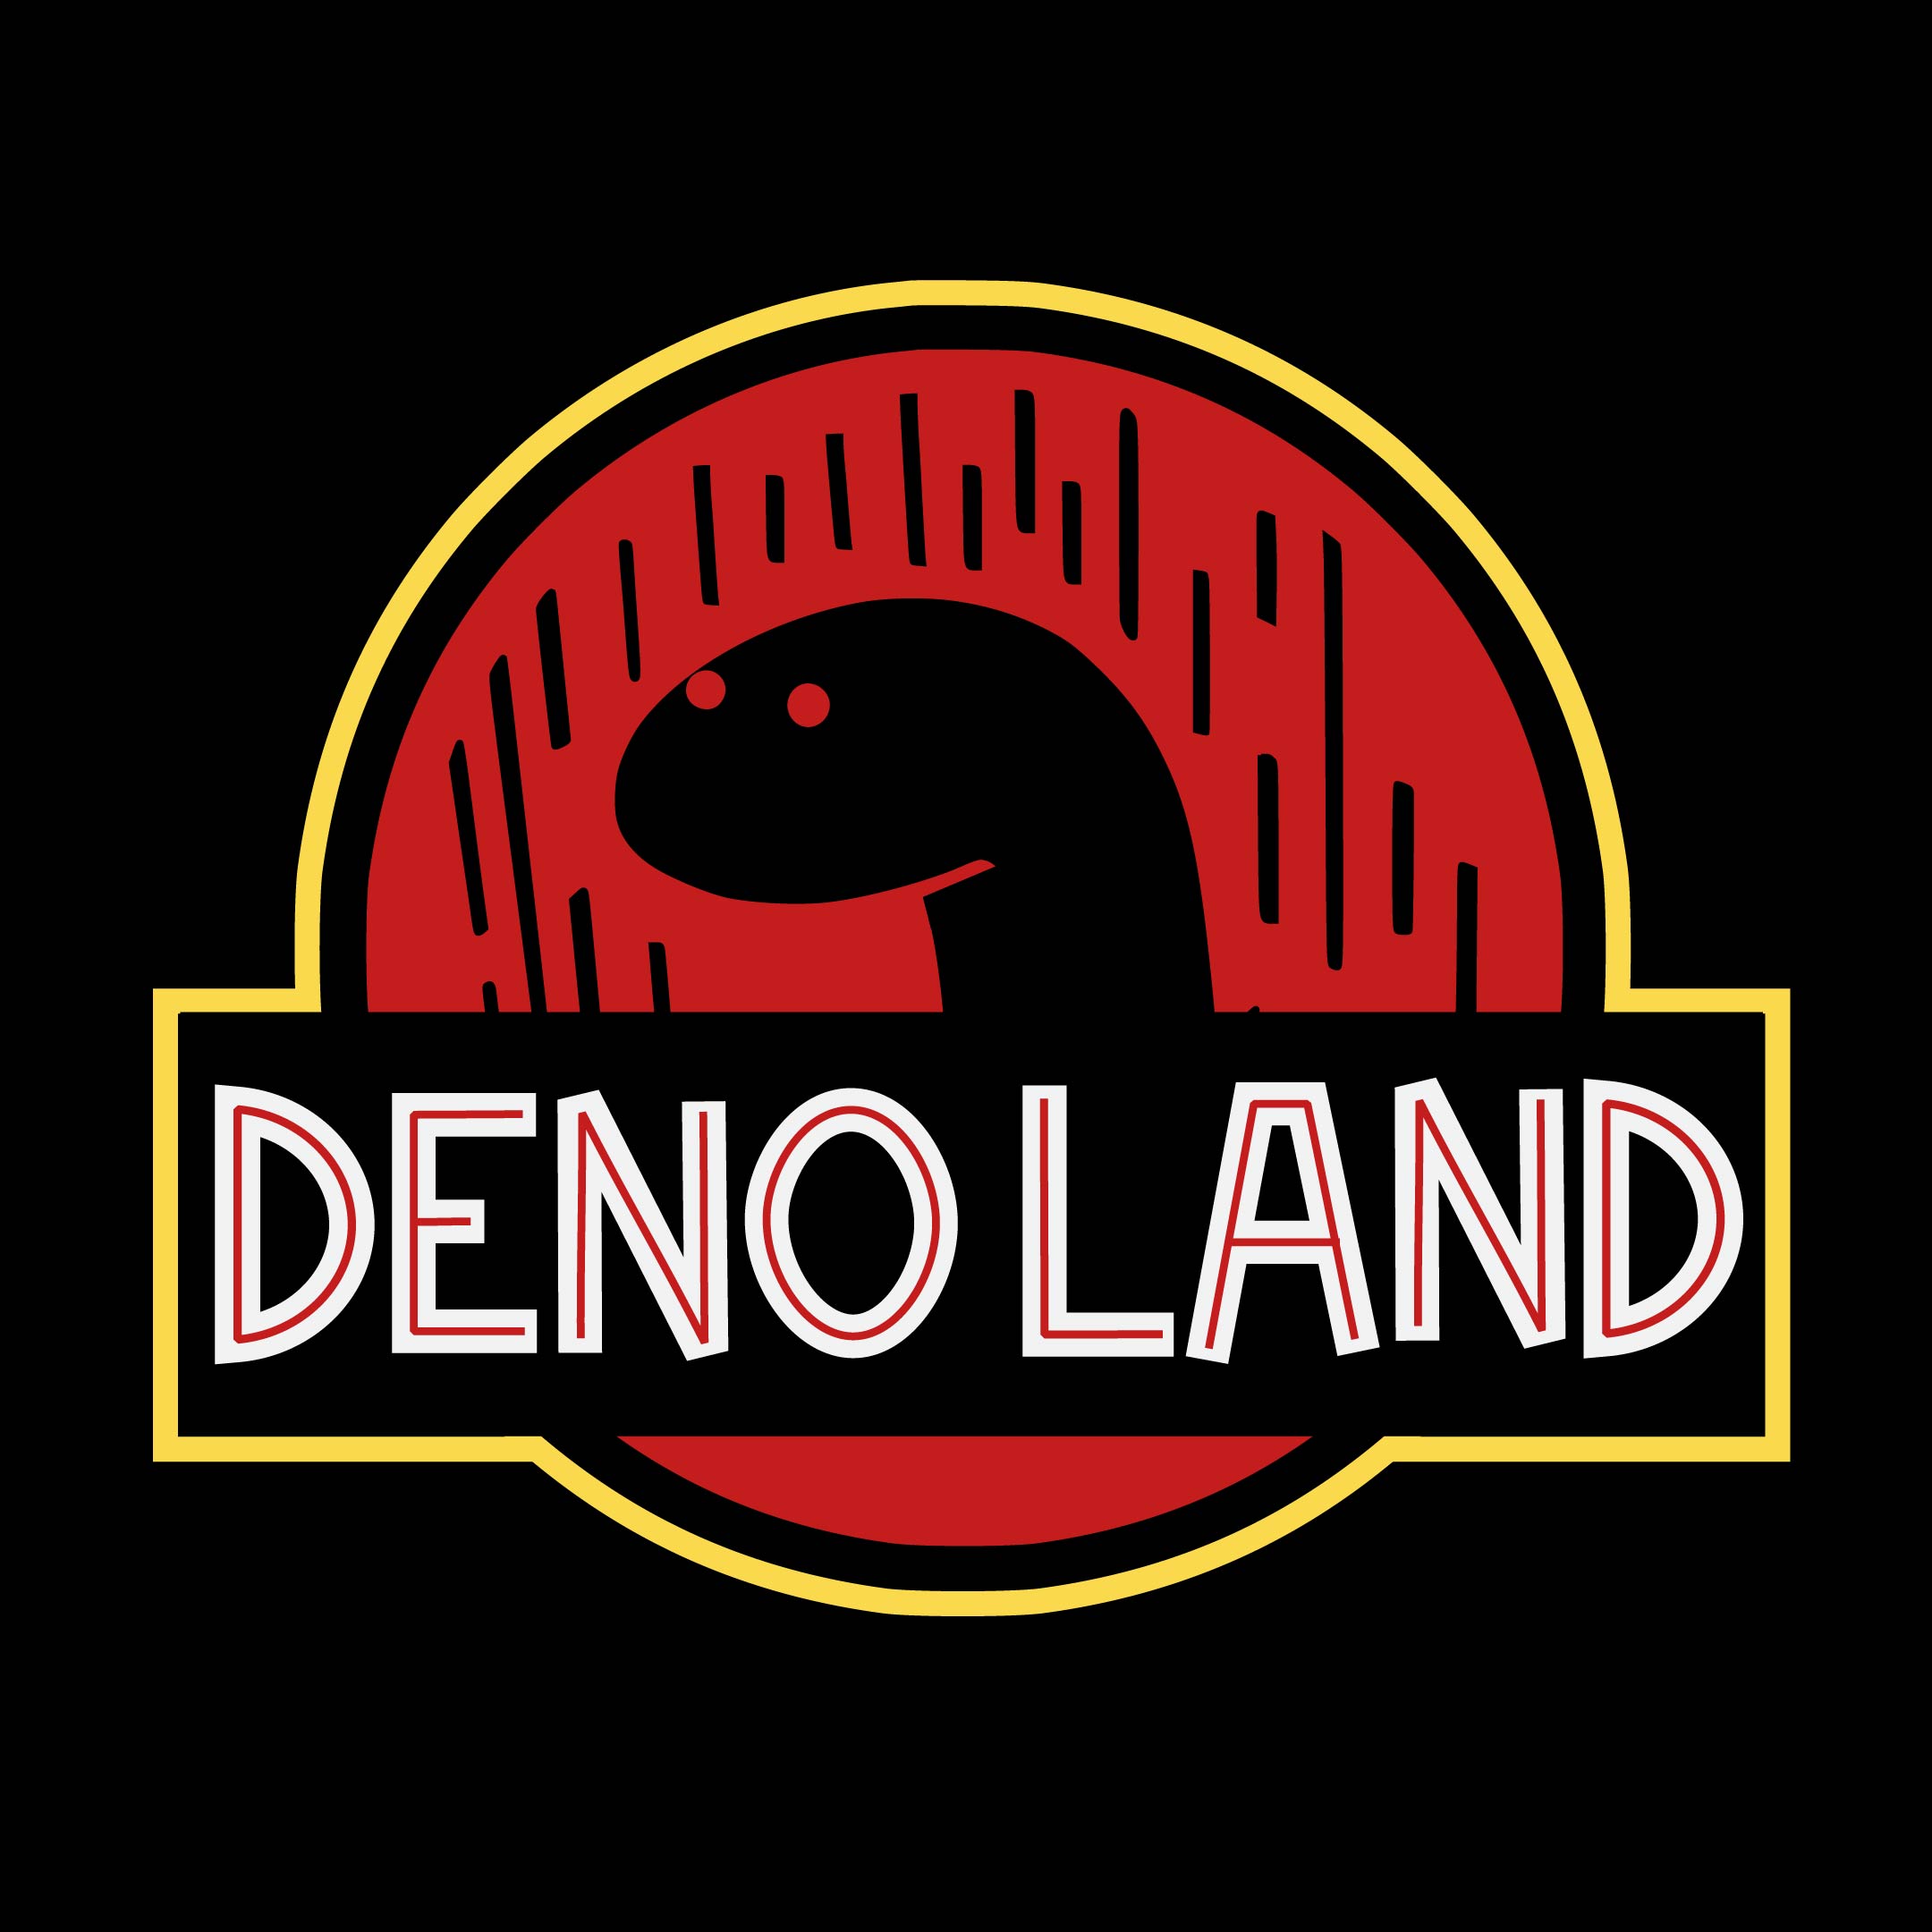 jurassic park themed deno logo in red, yellow, and black